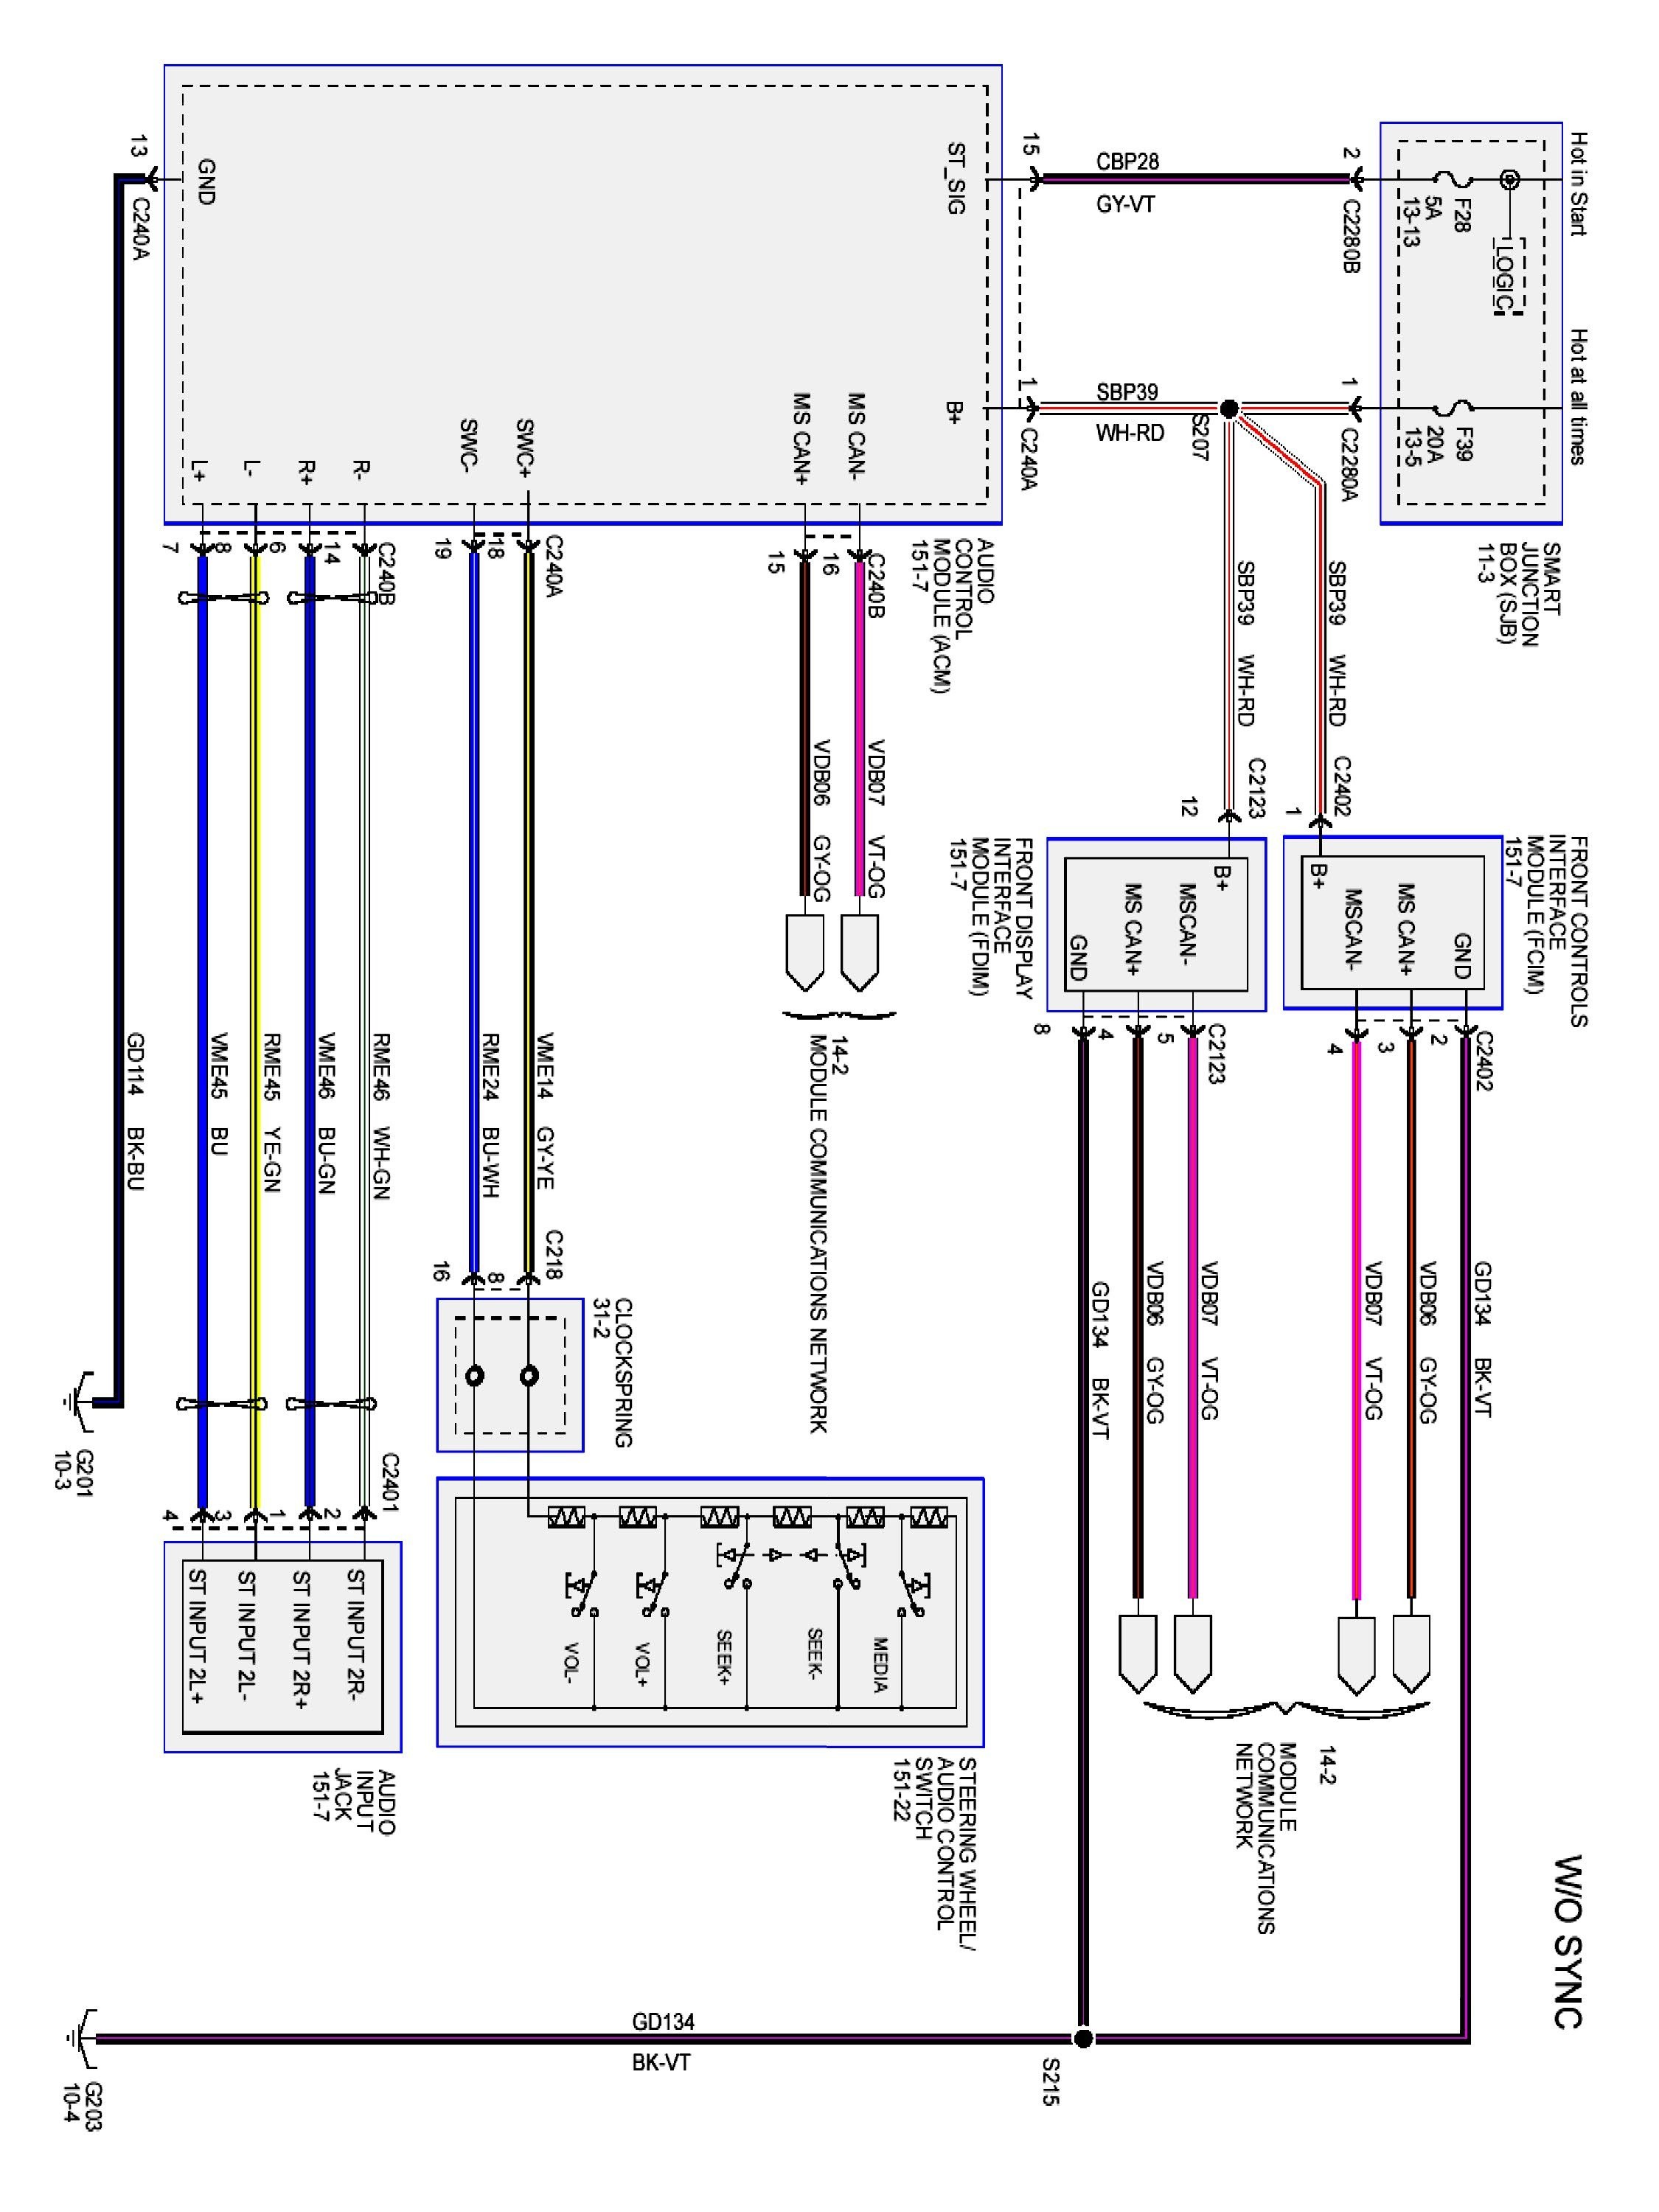 Car Stereo System Diagram Car Radio Cables Chevy Wiring Diagram Kit Speaker Wire Stereo Of Car Stereo System Diagram